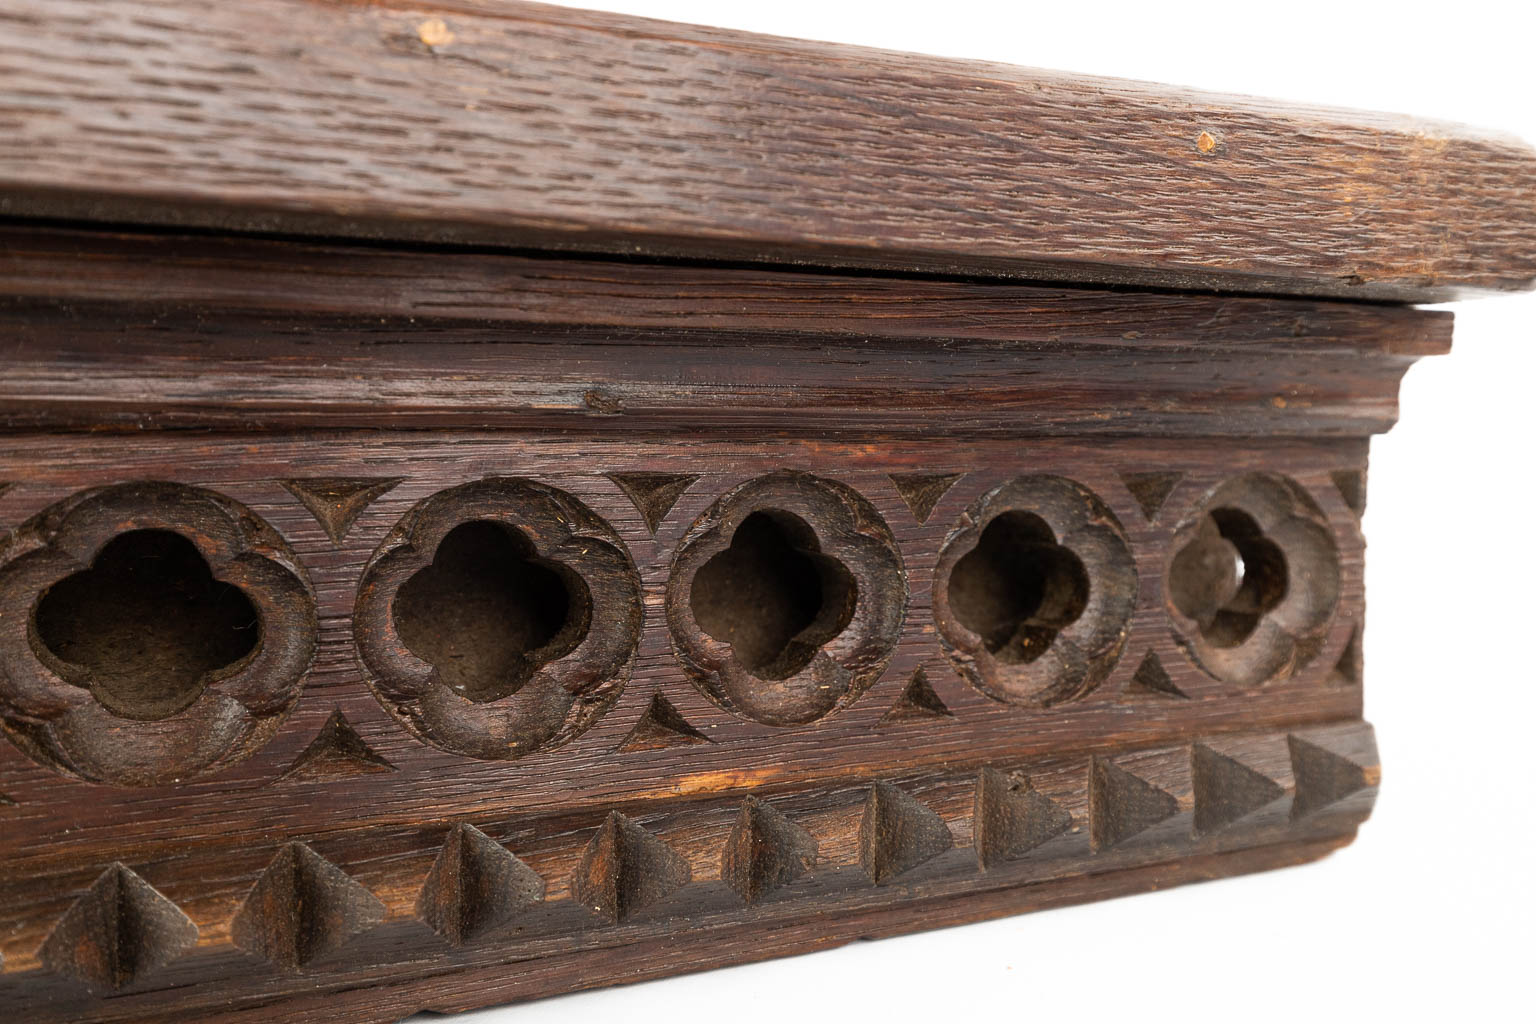 A console for a statue, made of wood in gothic revival style. (H:12cm)